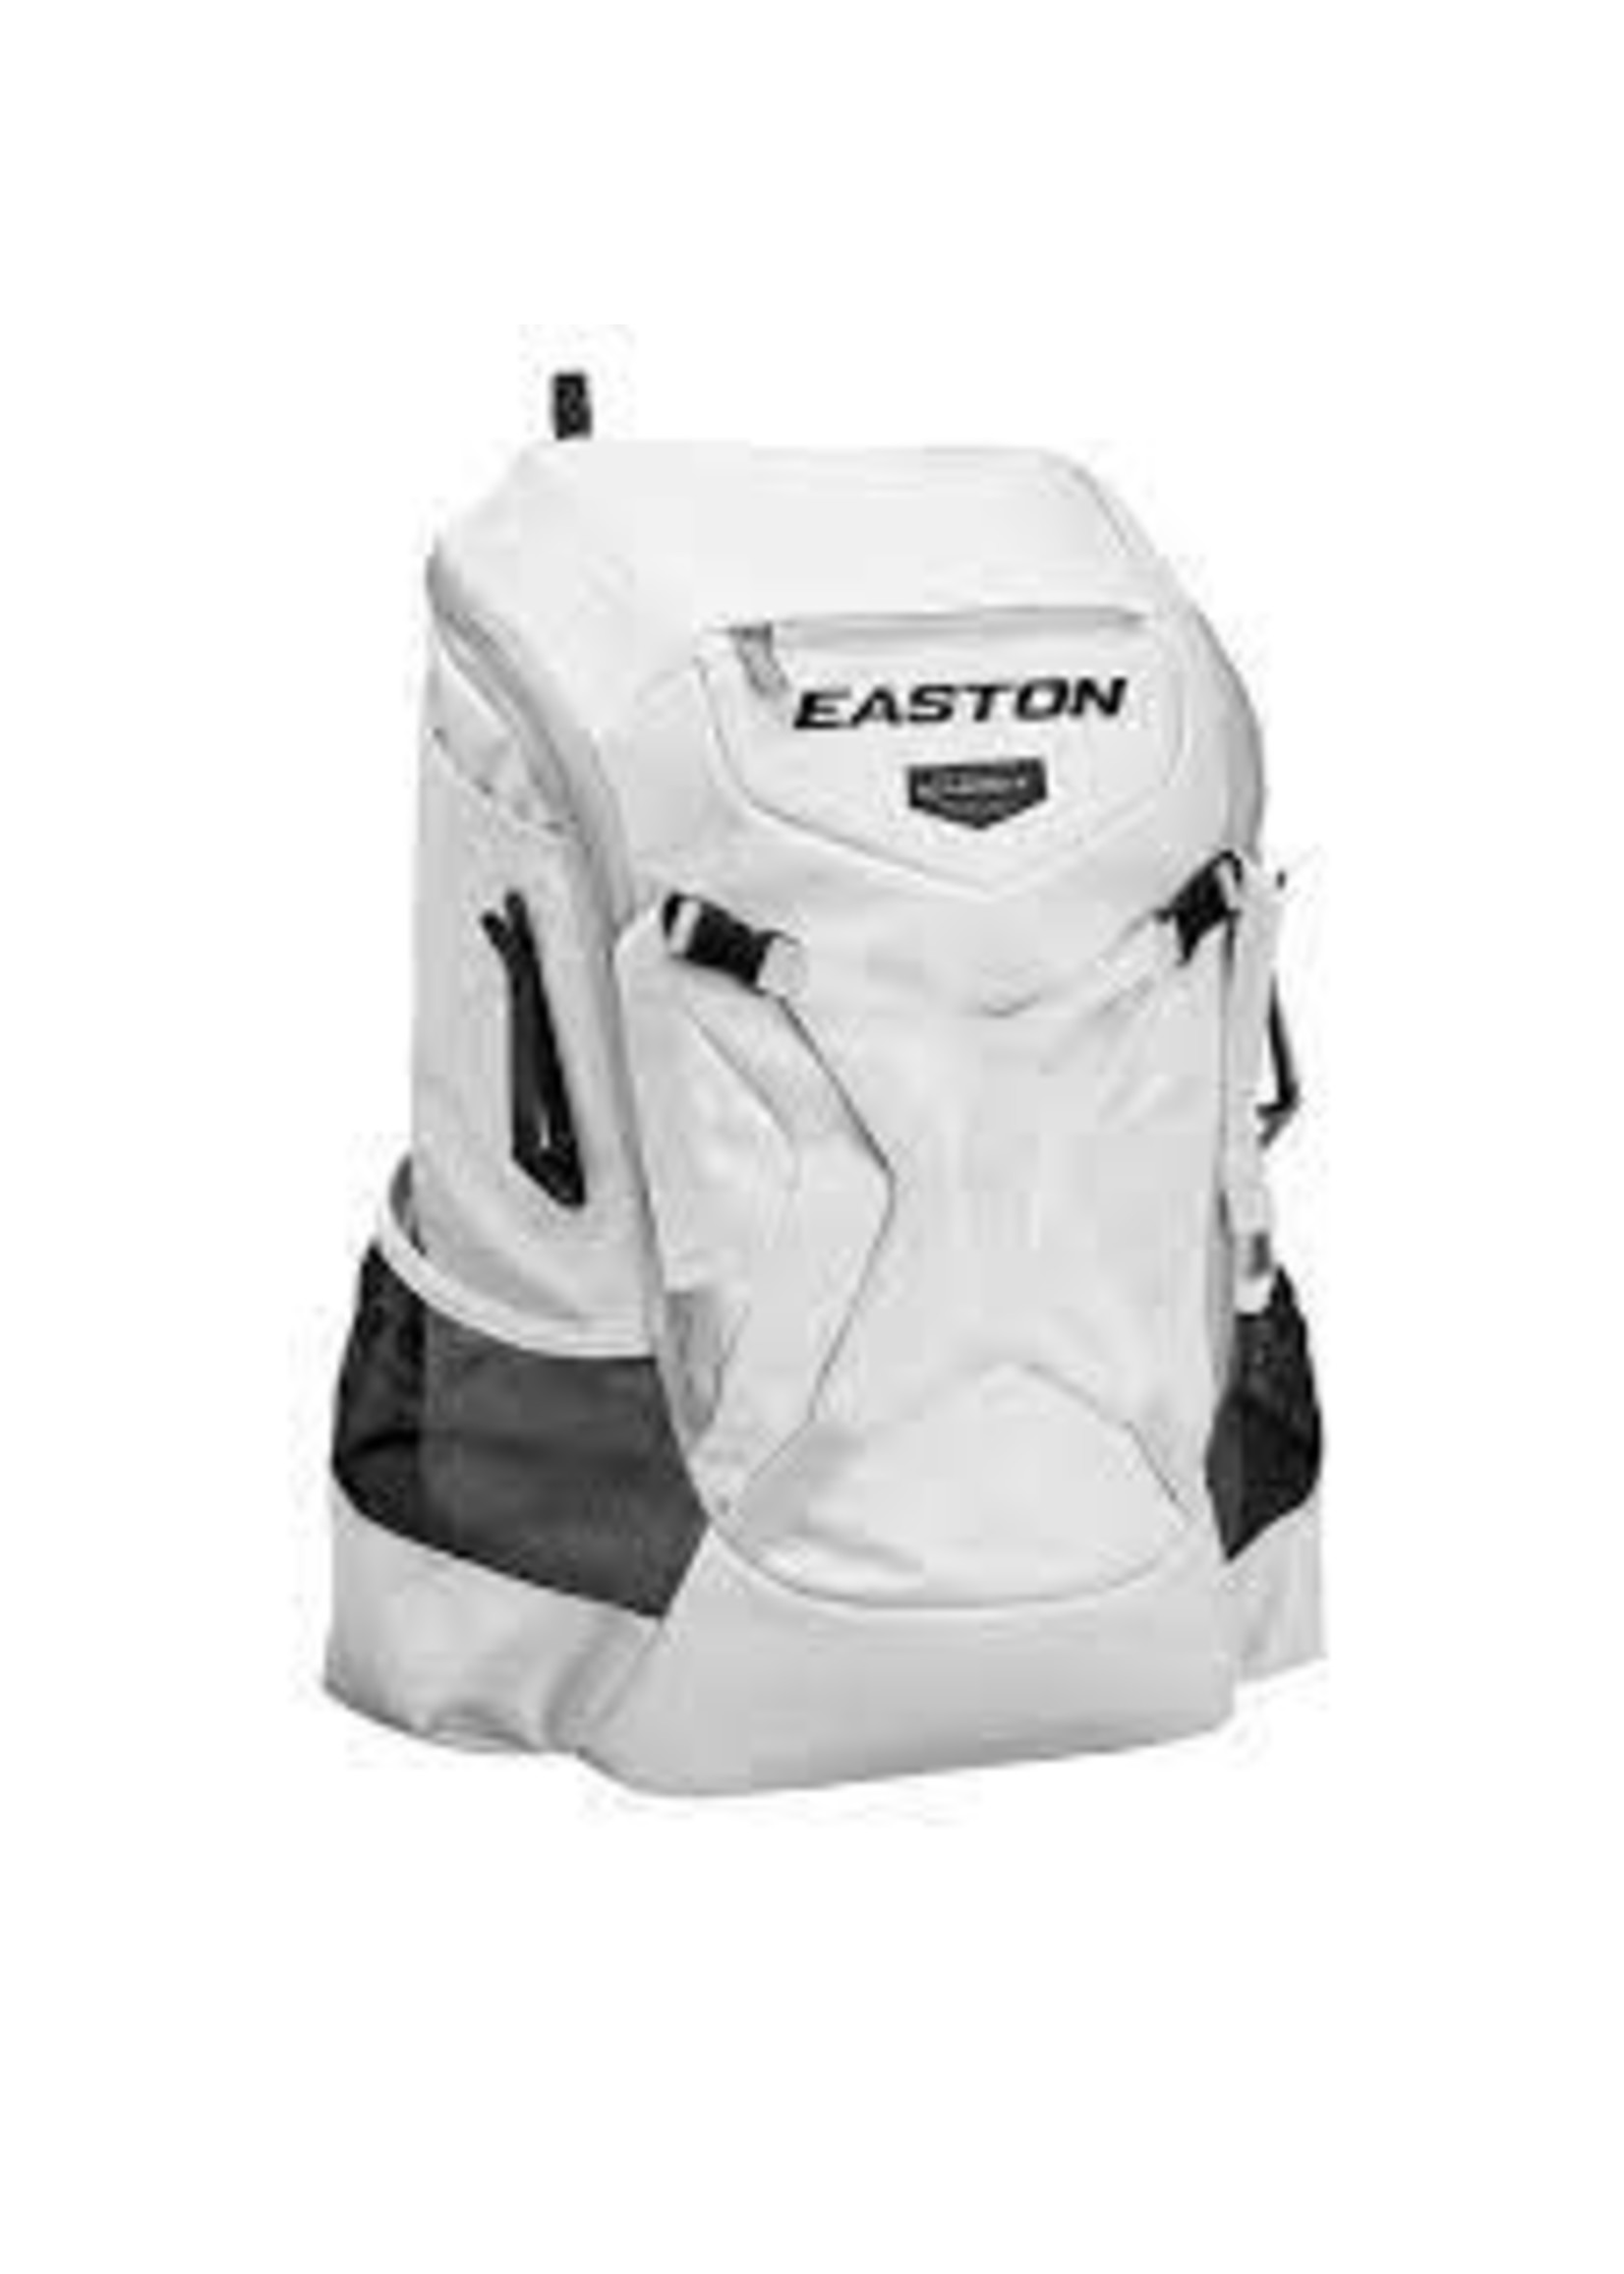 EASTON EASTON GHOST NX FASTPITCH BACKPACK